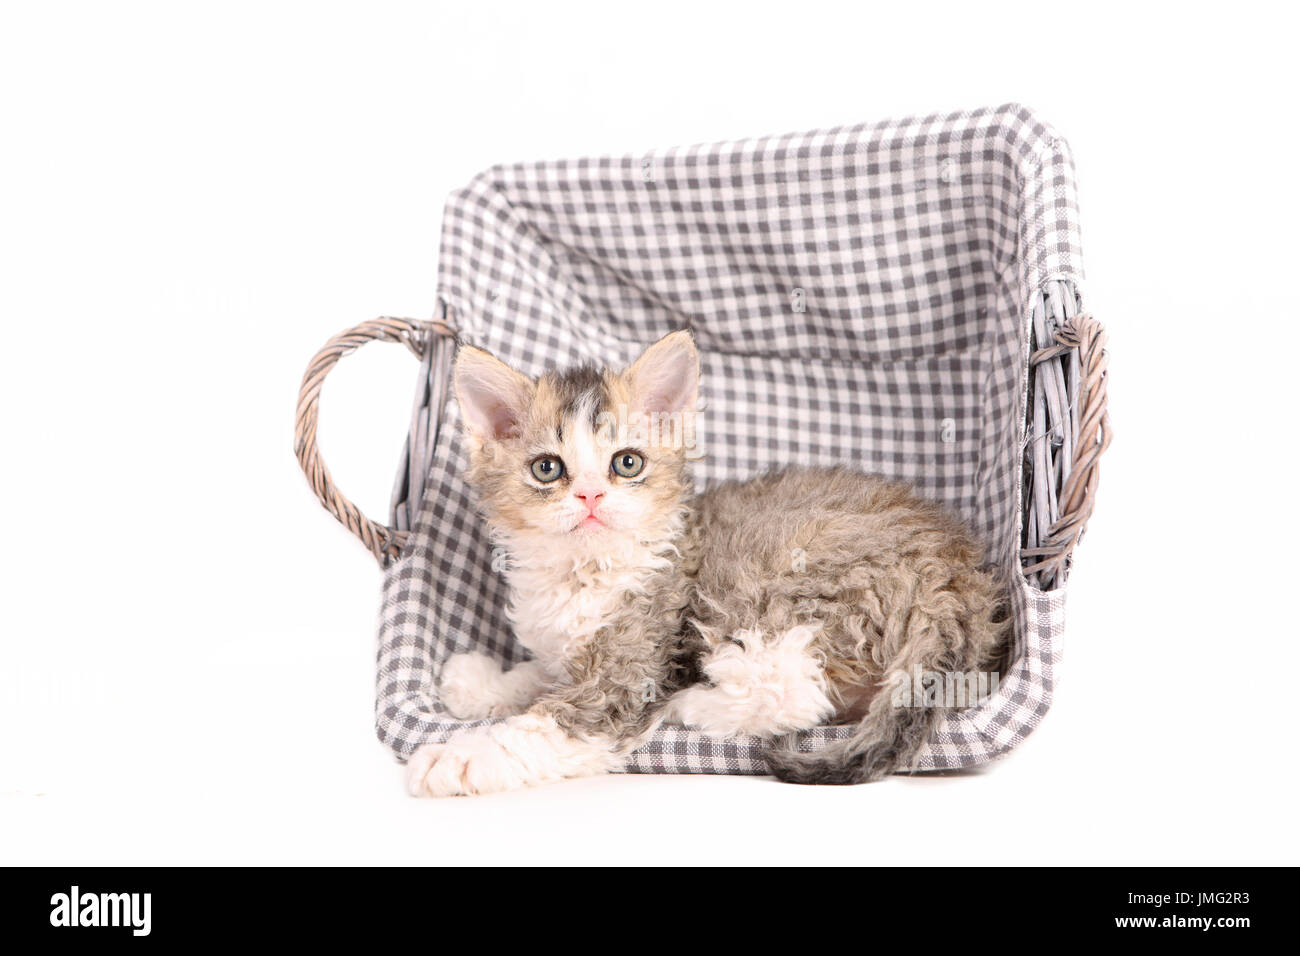 Selkirk Rex. Kitten (6 weeks old) lying in a basket. Studio picture against a white background. Germany Stock Photo